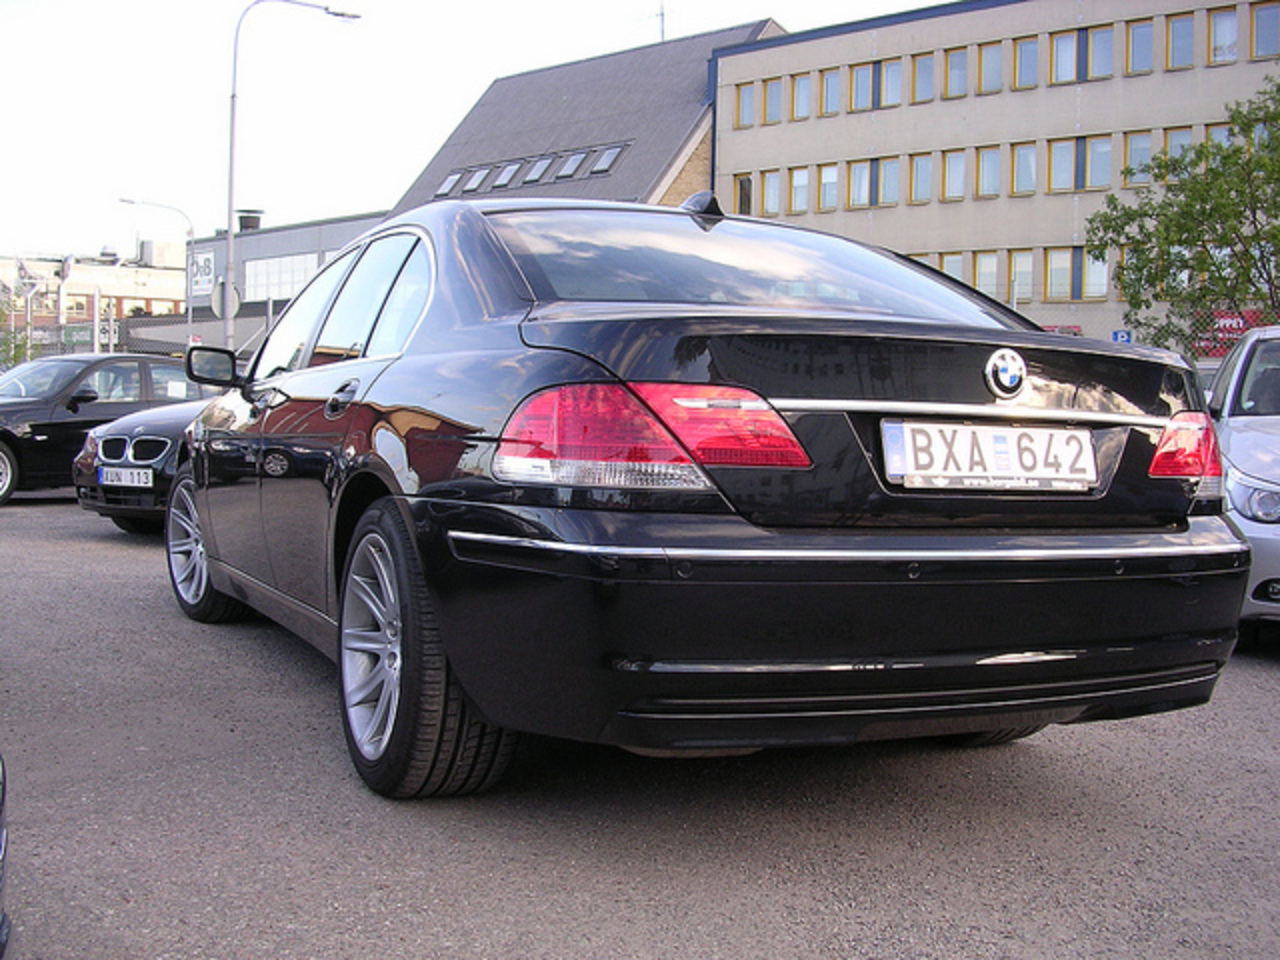 BMW 730d E65 2006 | Flickr - Photo Sharing!